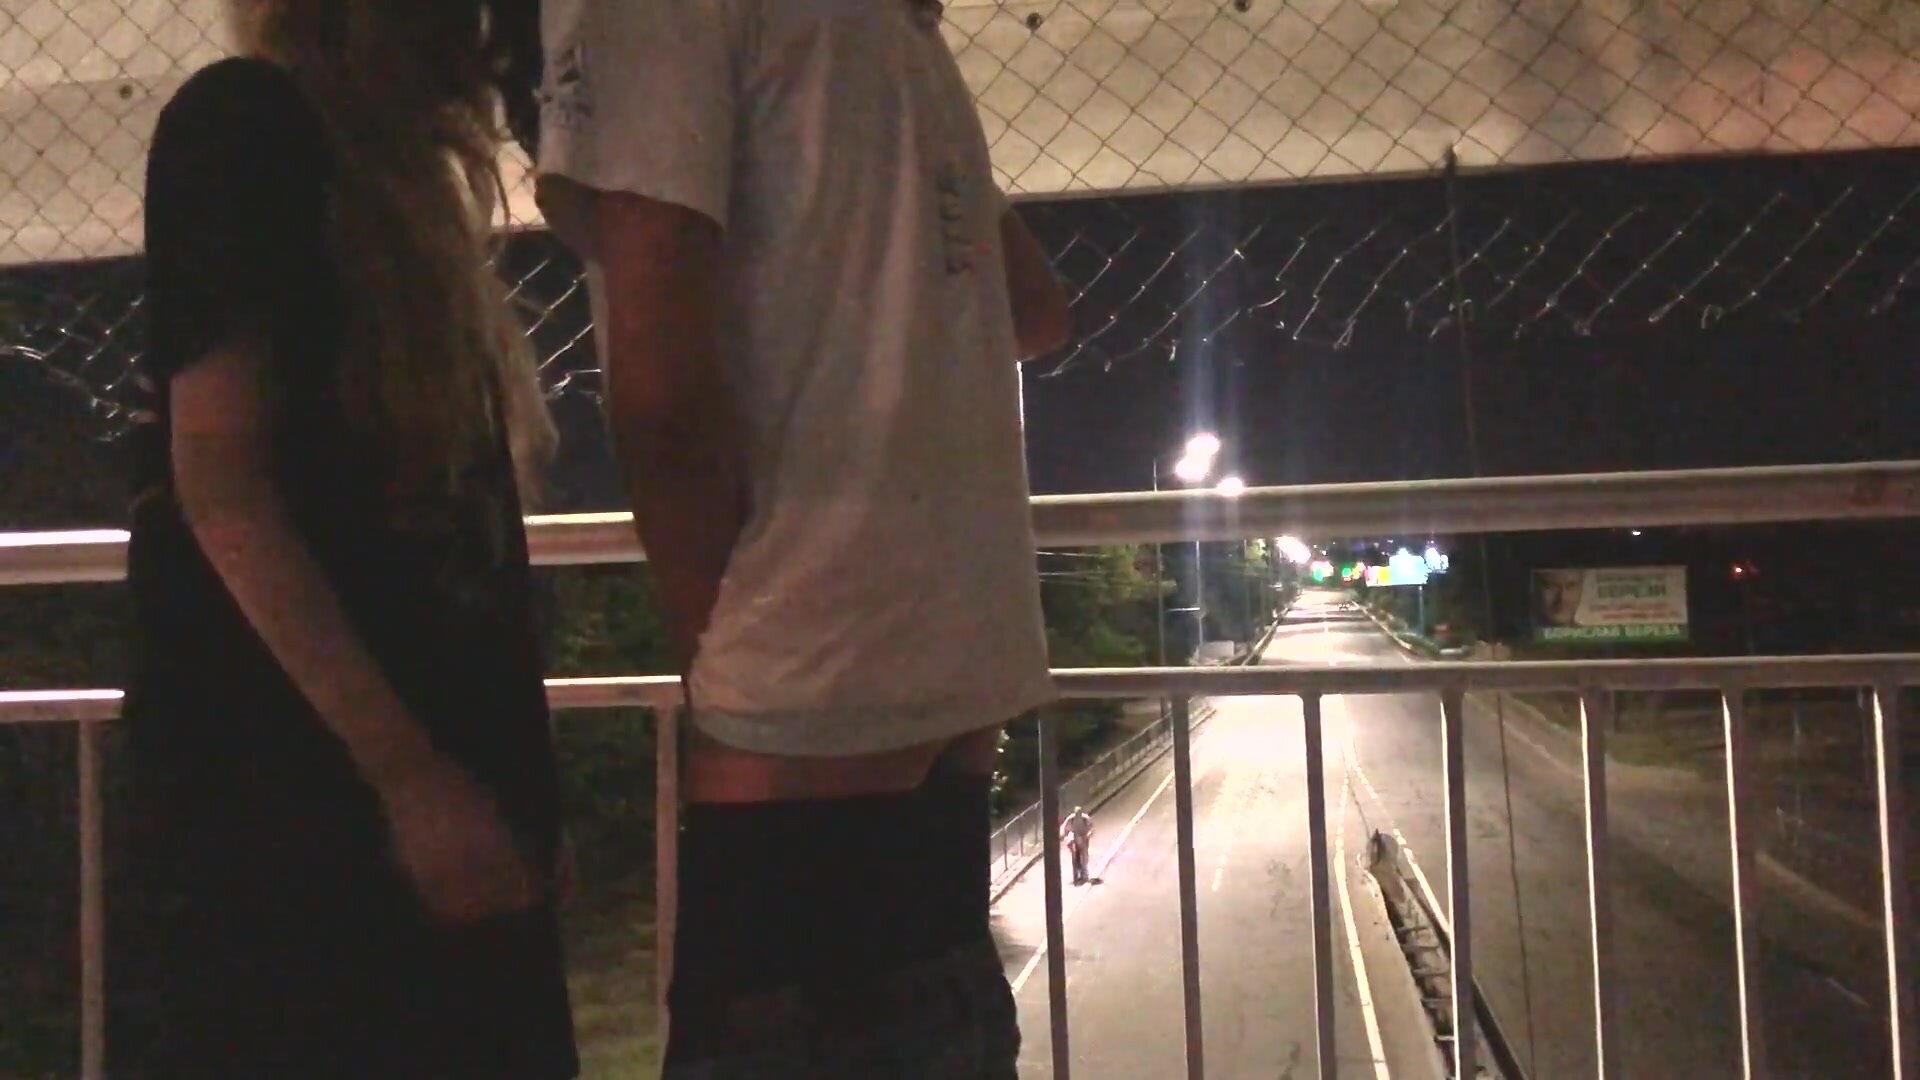 Burzumgirl - School girl fucks her step brother in the middle of highway while her boyfriend isn't looking